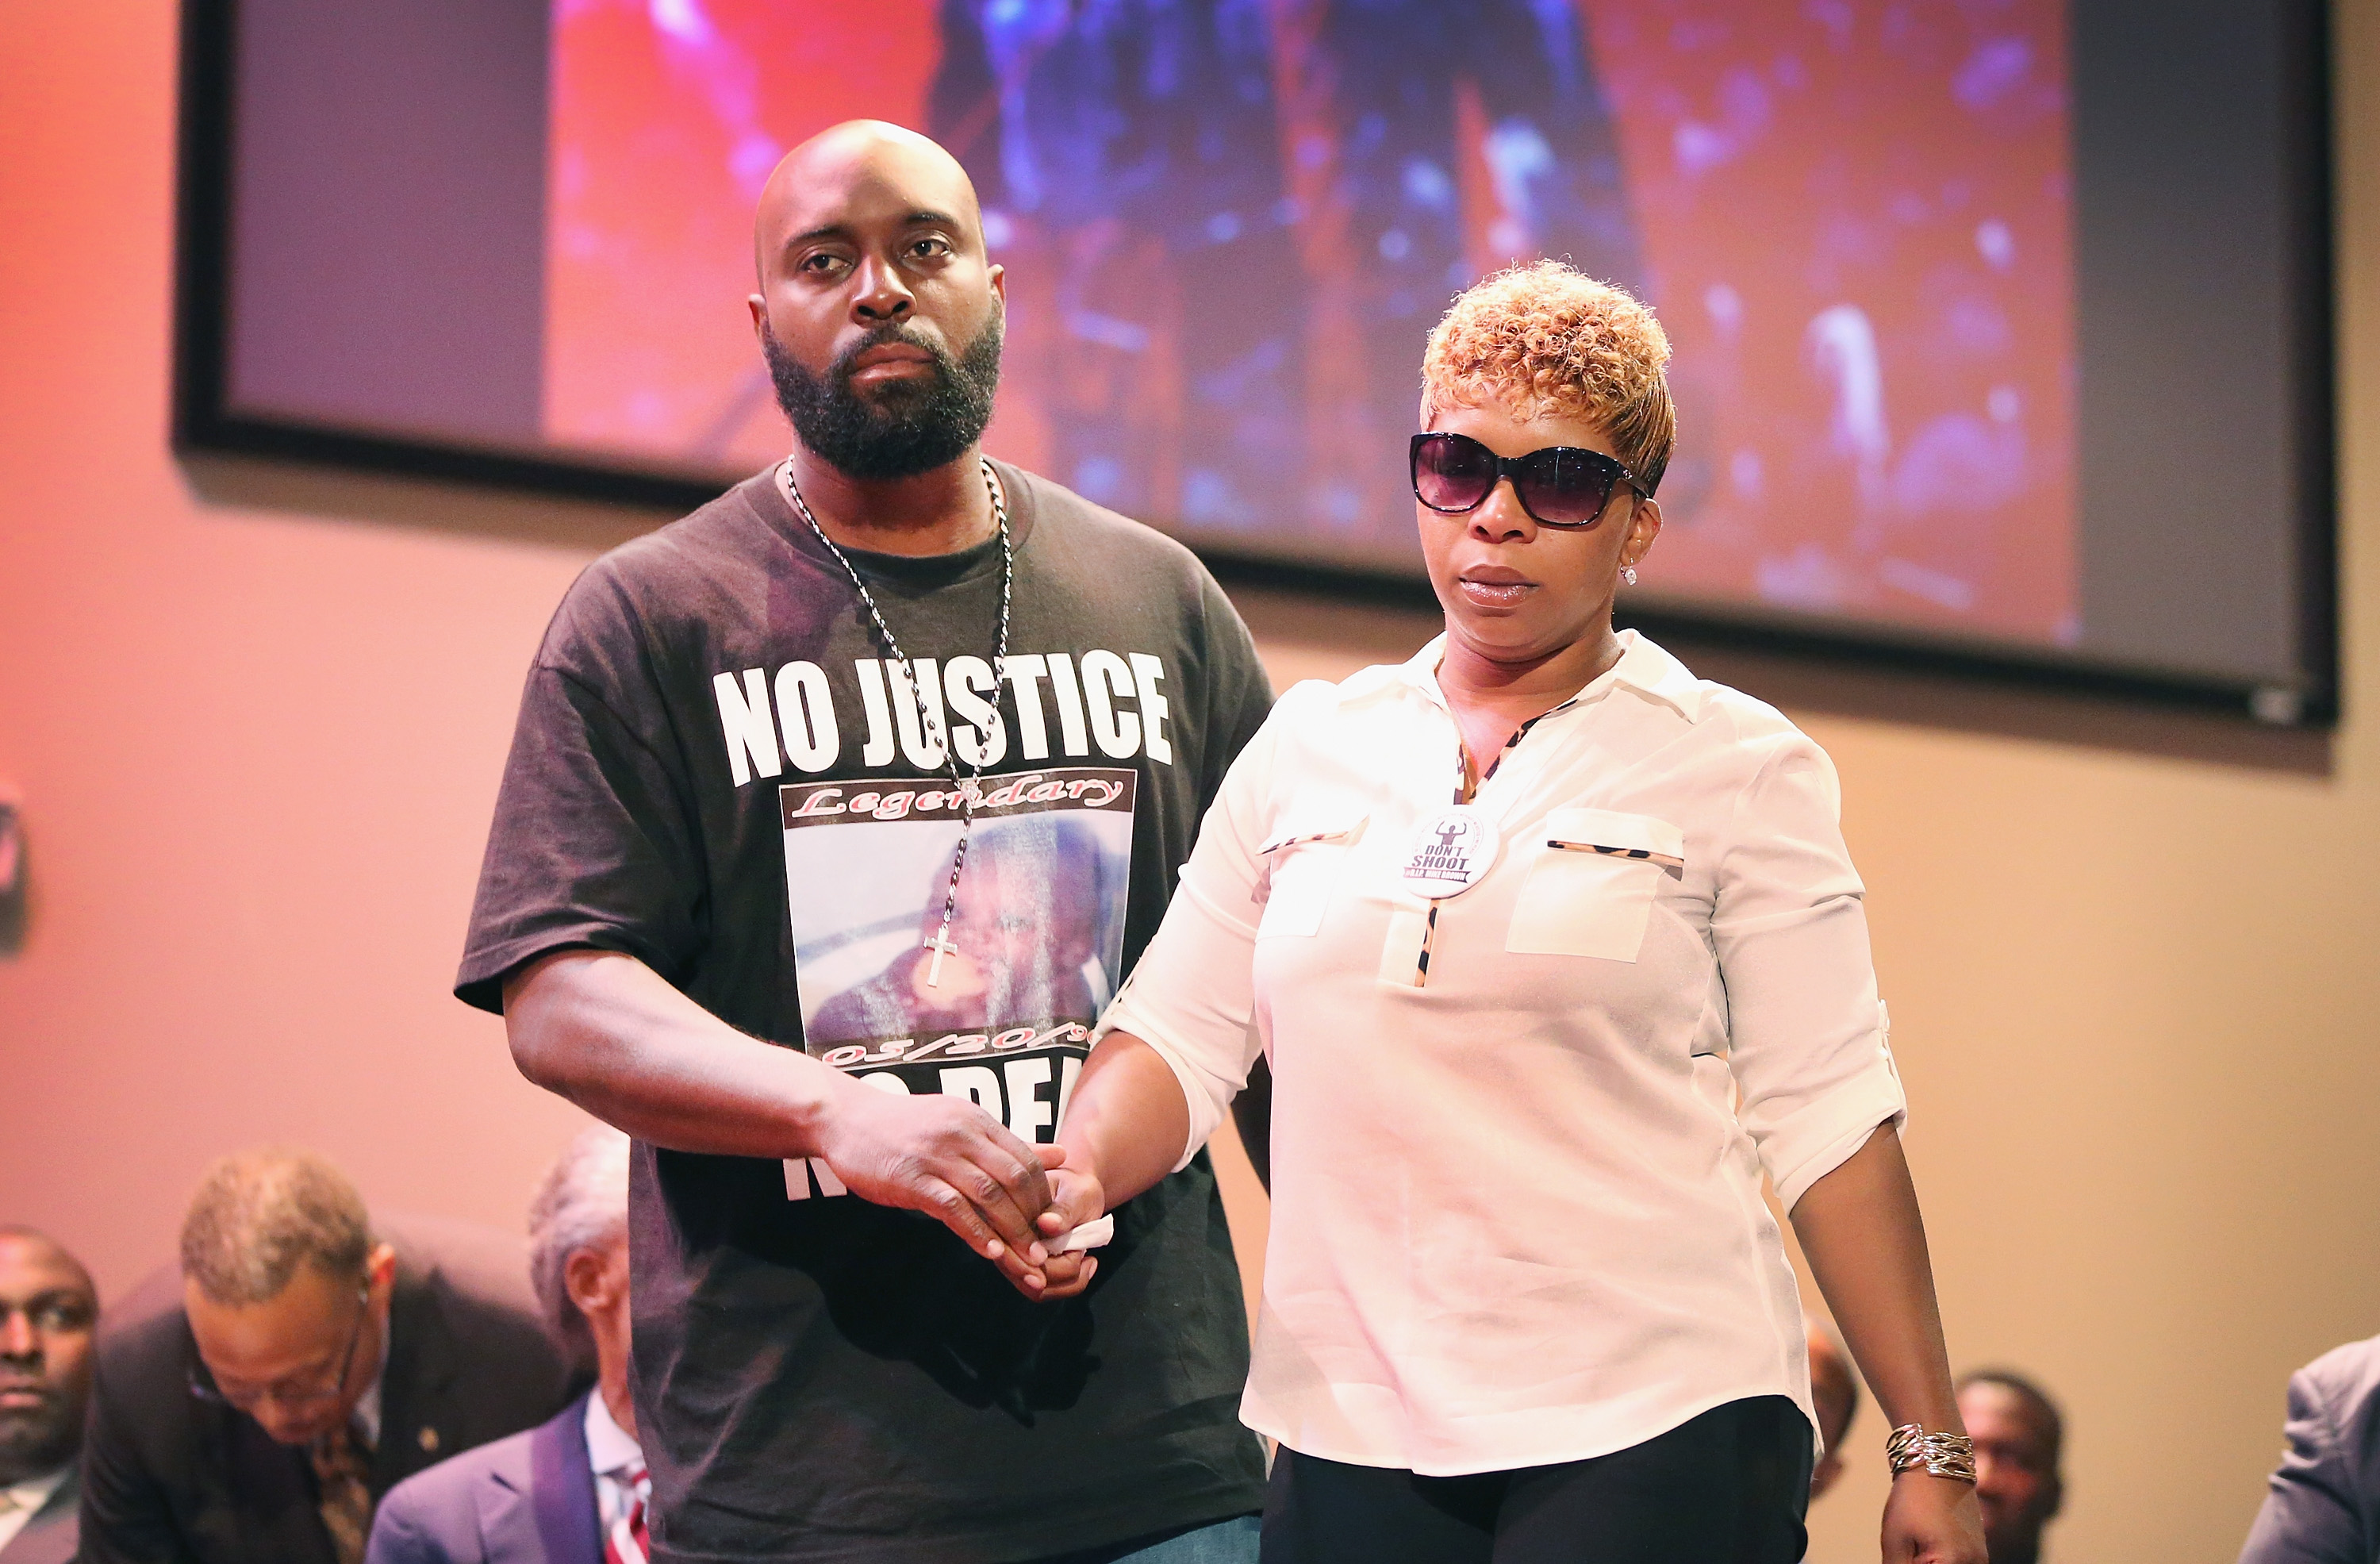 [Video] Michael Brown’s Parents Looking to Feds for Justice